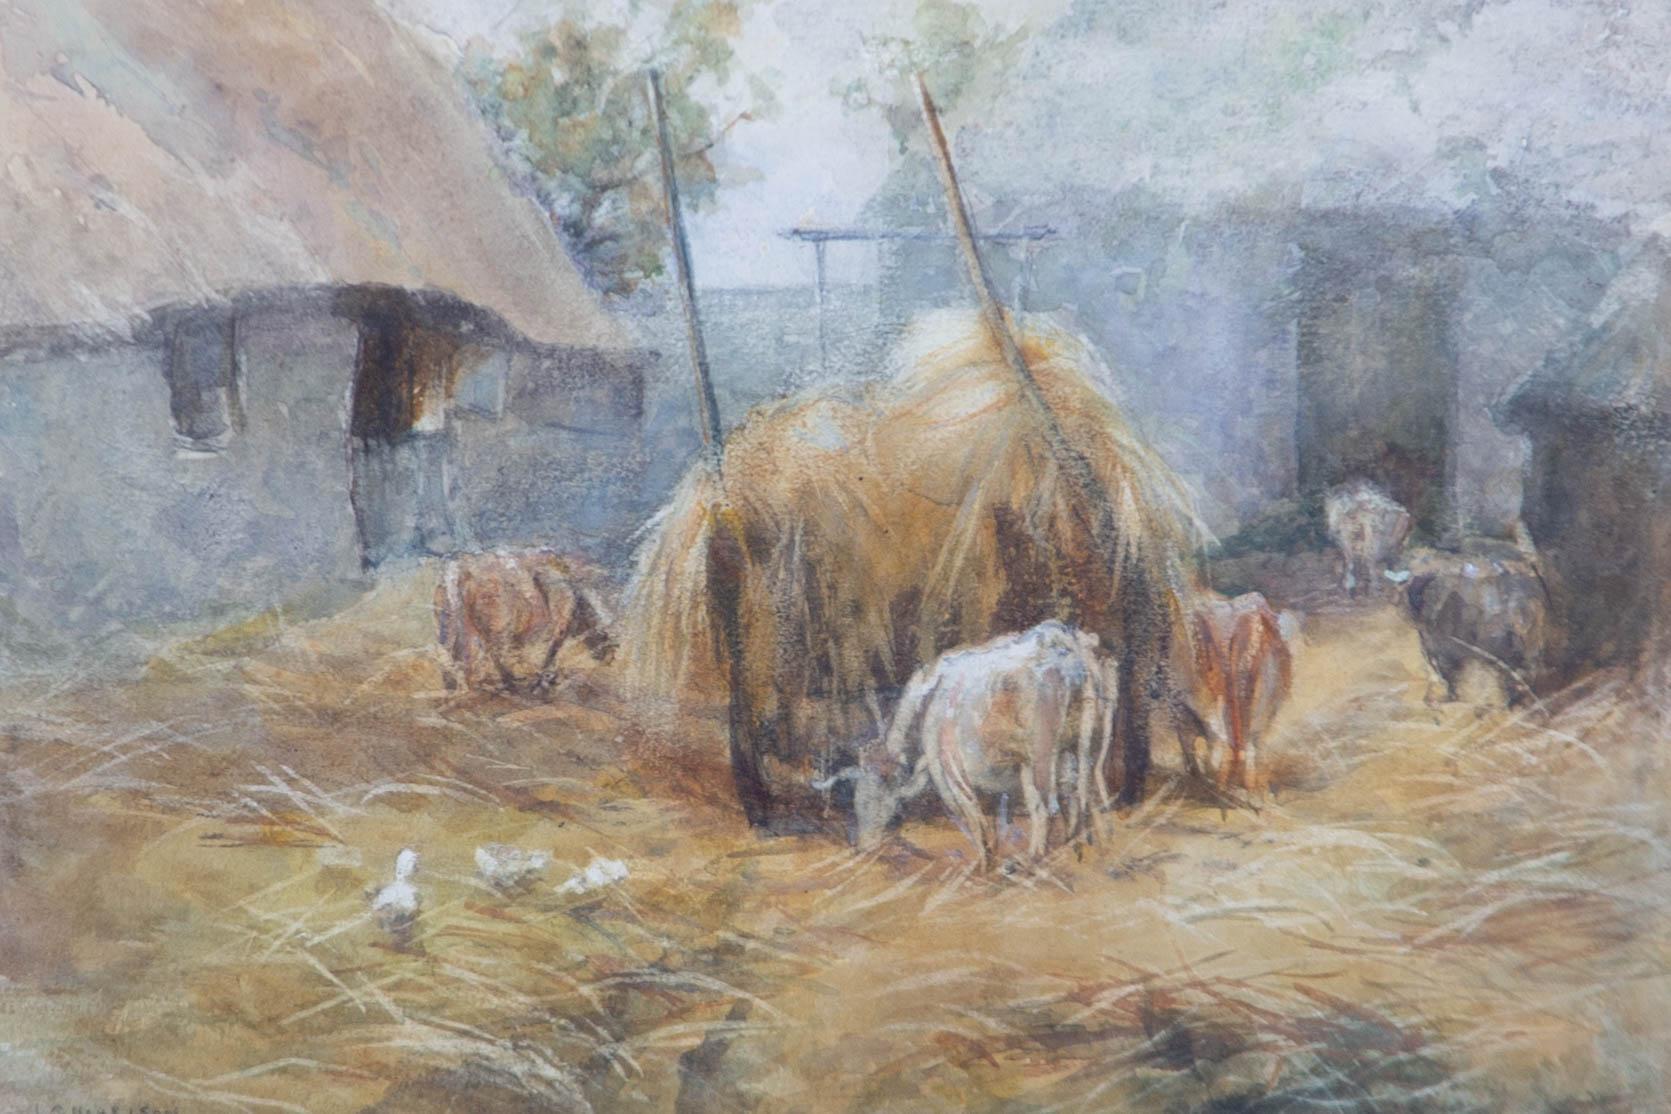 A pastoral scene of cattle grazing on hay in a farmyard. Presented glazed in a cream slip and a substantial ornate frame with leaf and berry detailing to the outer edge. Signed and dated to the lower-left edge. On watercolour paper.
